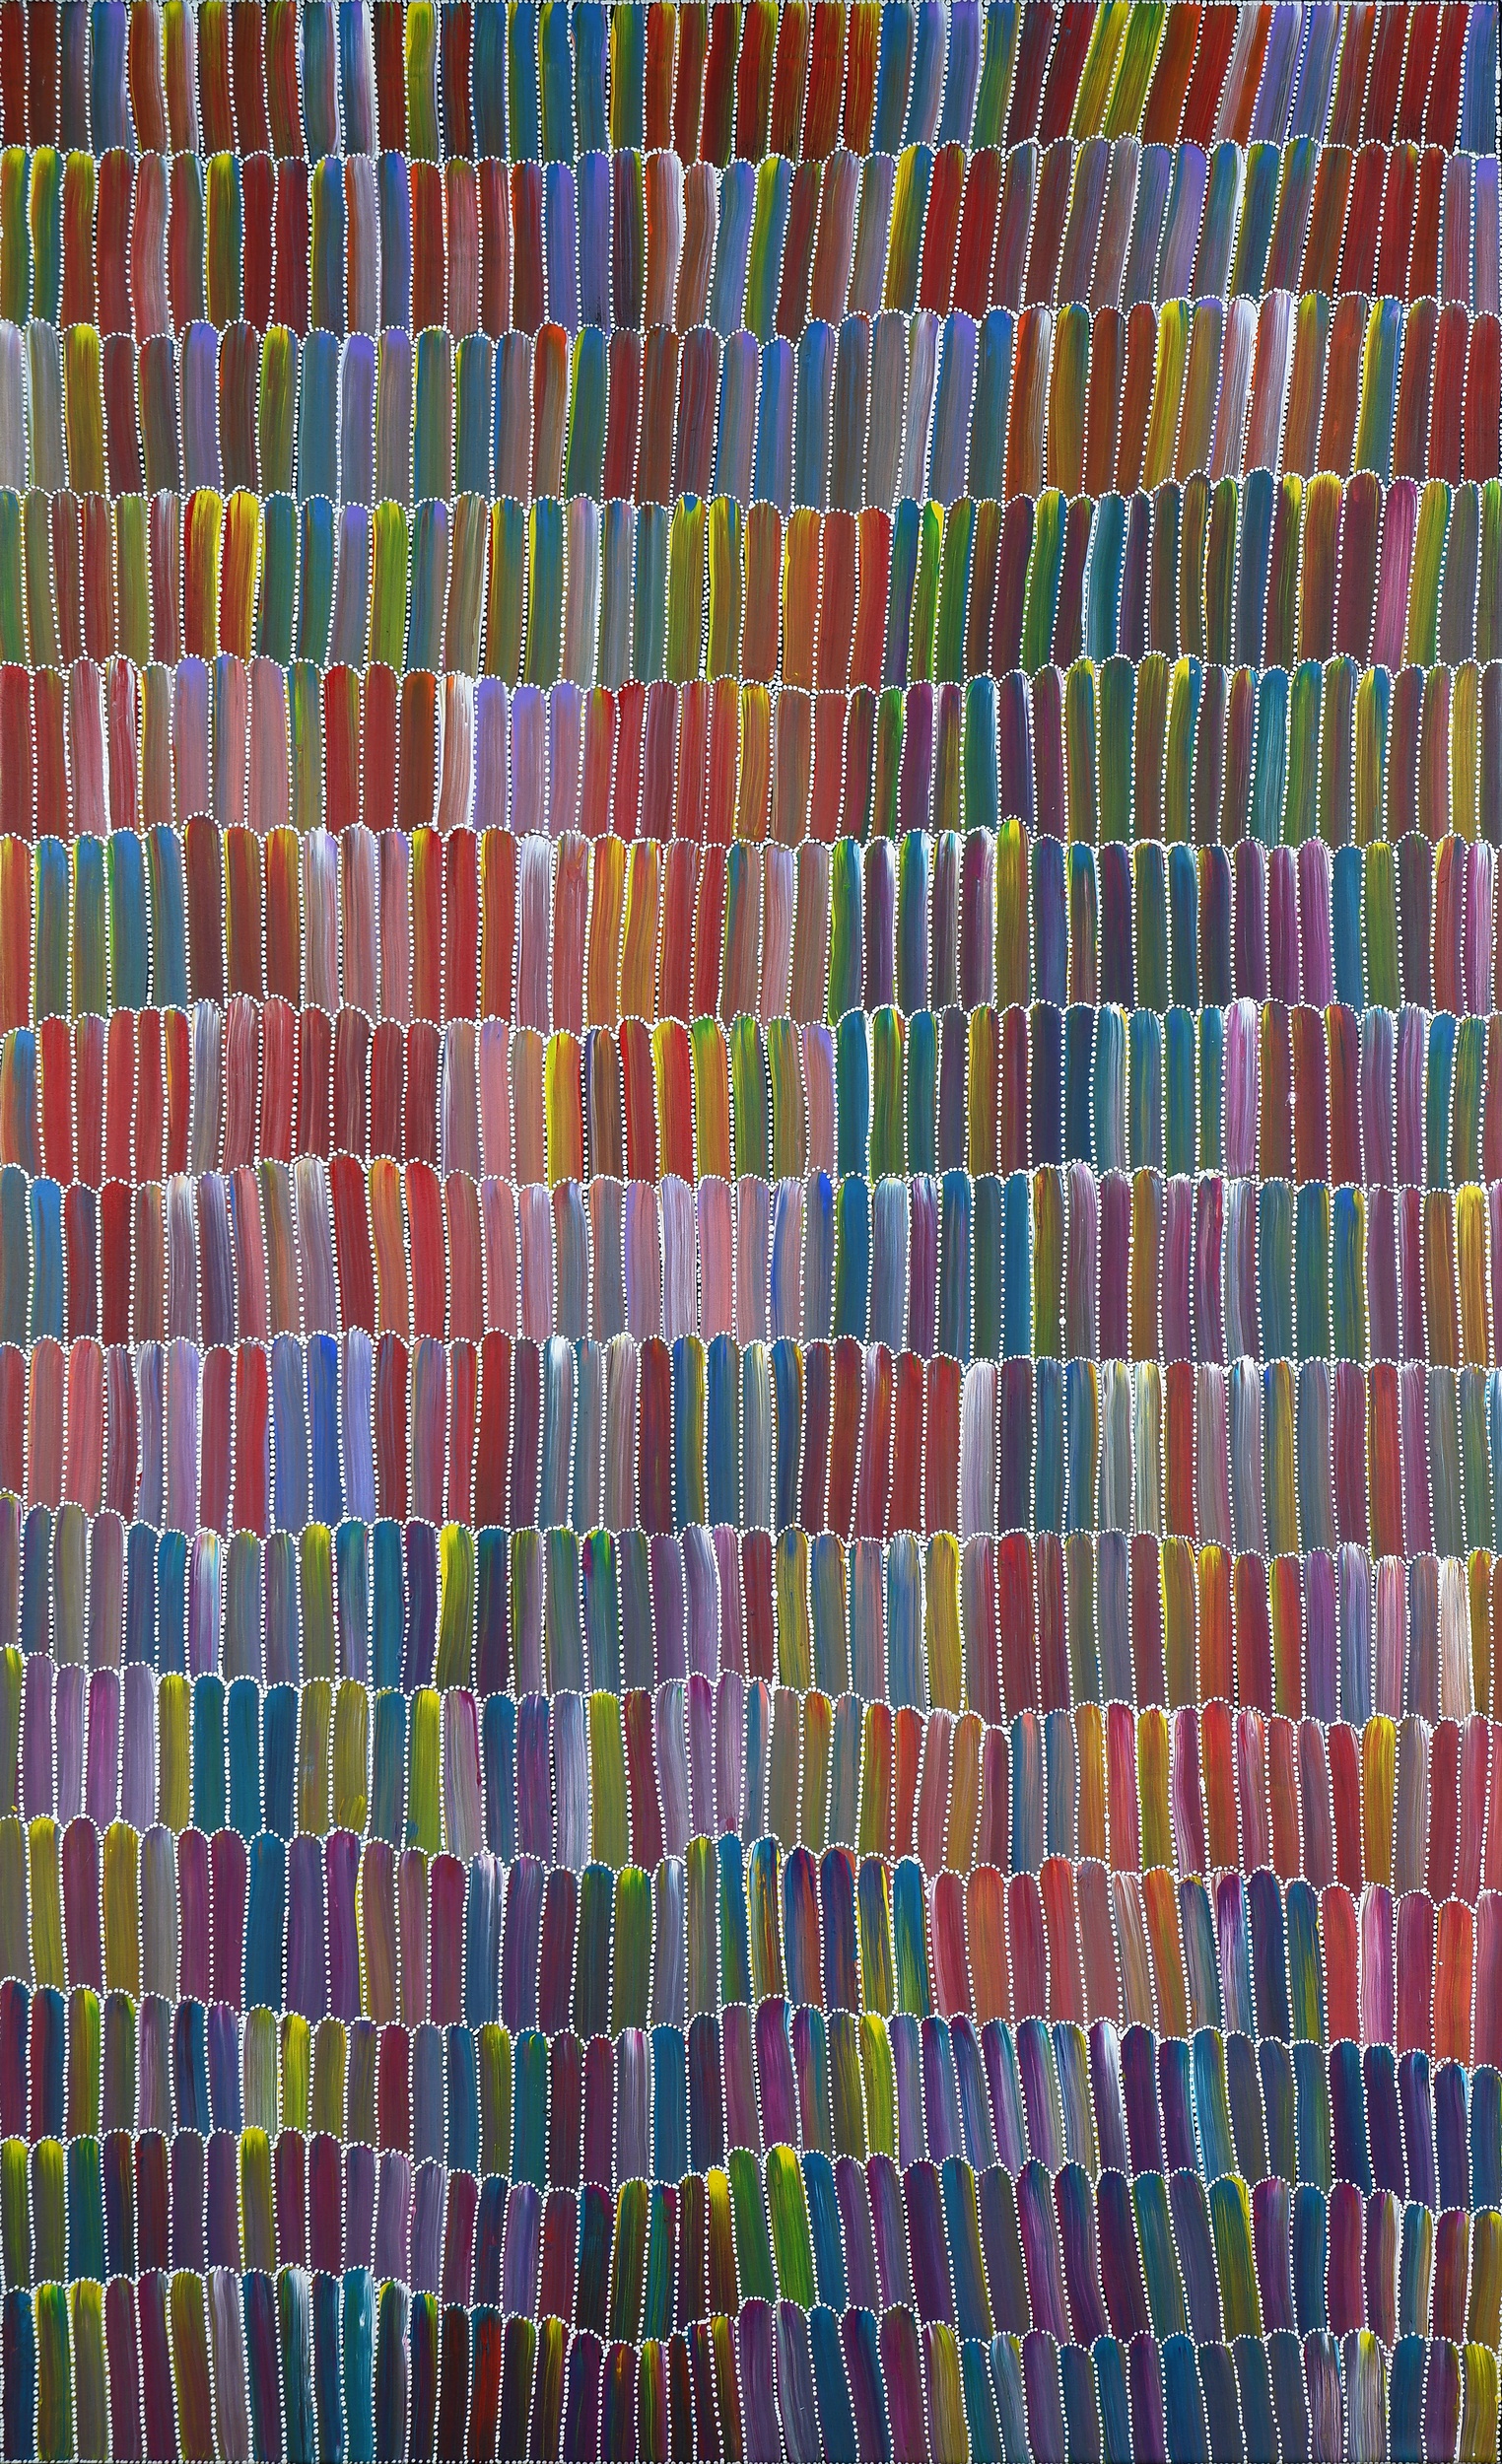 'Jeannie Mills Pwerle (born 1965), Bush Yam, Synthetic Polymer Paint on Canvas'